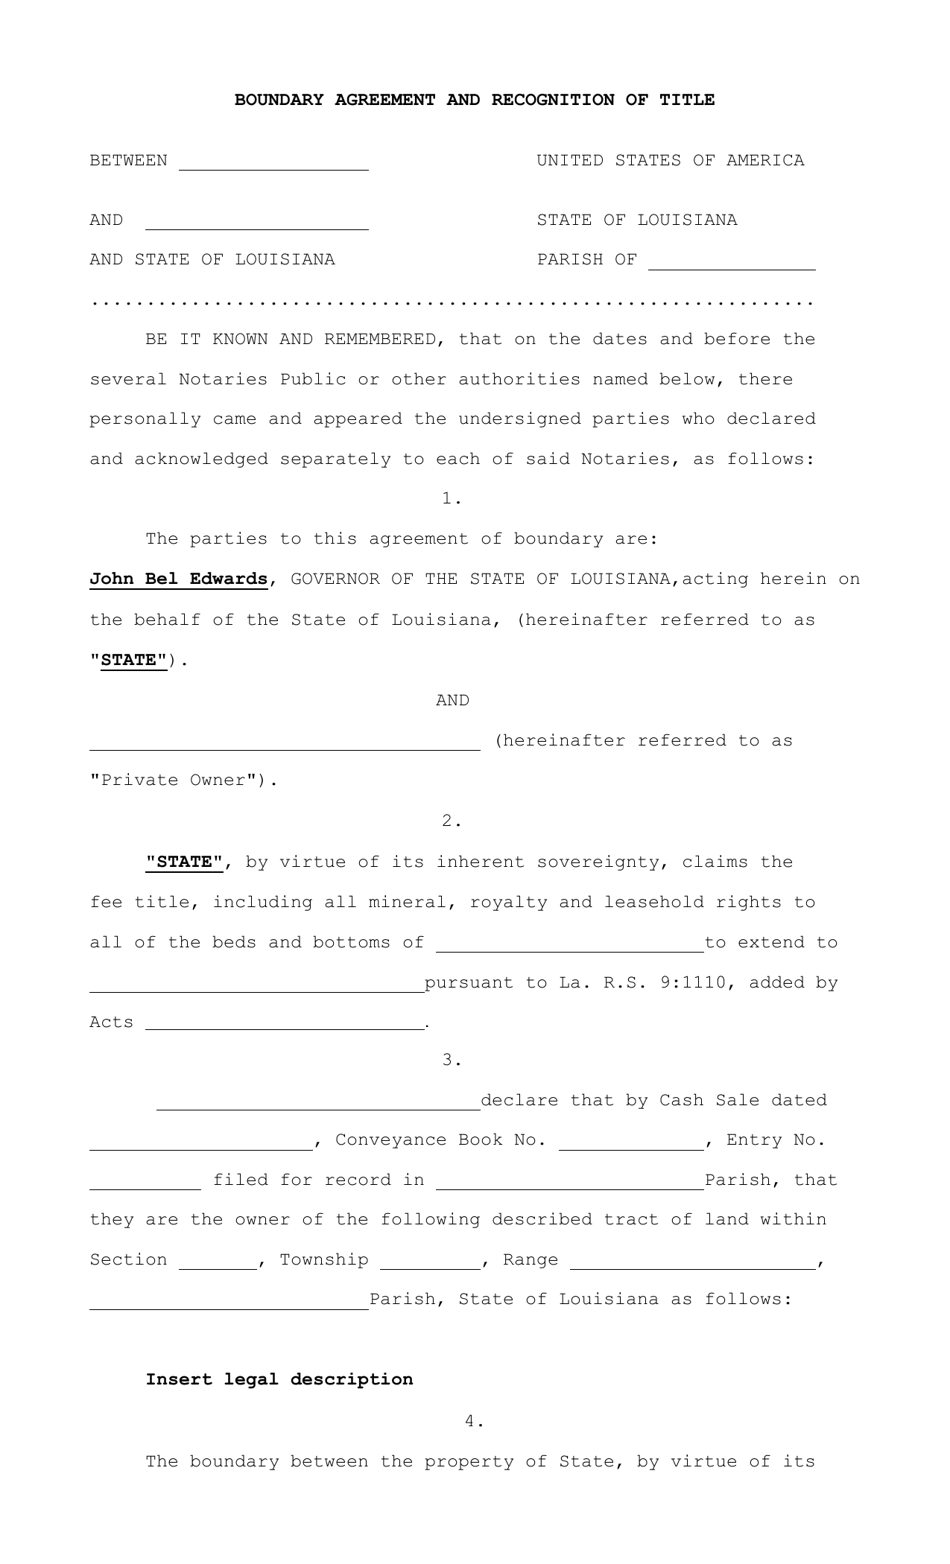 Boundary Agreement and Recognition of Title - Louisiana, Page 1